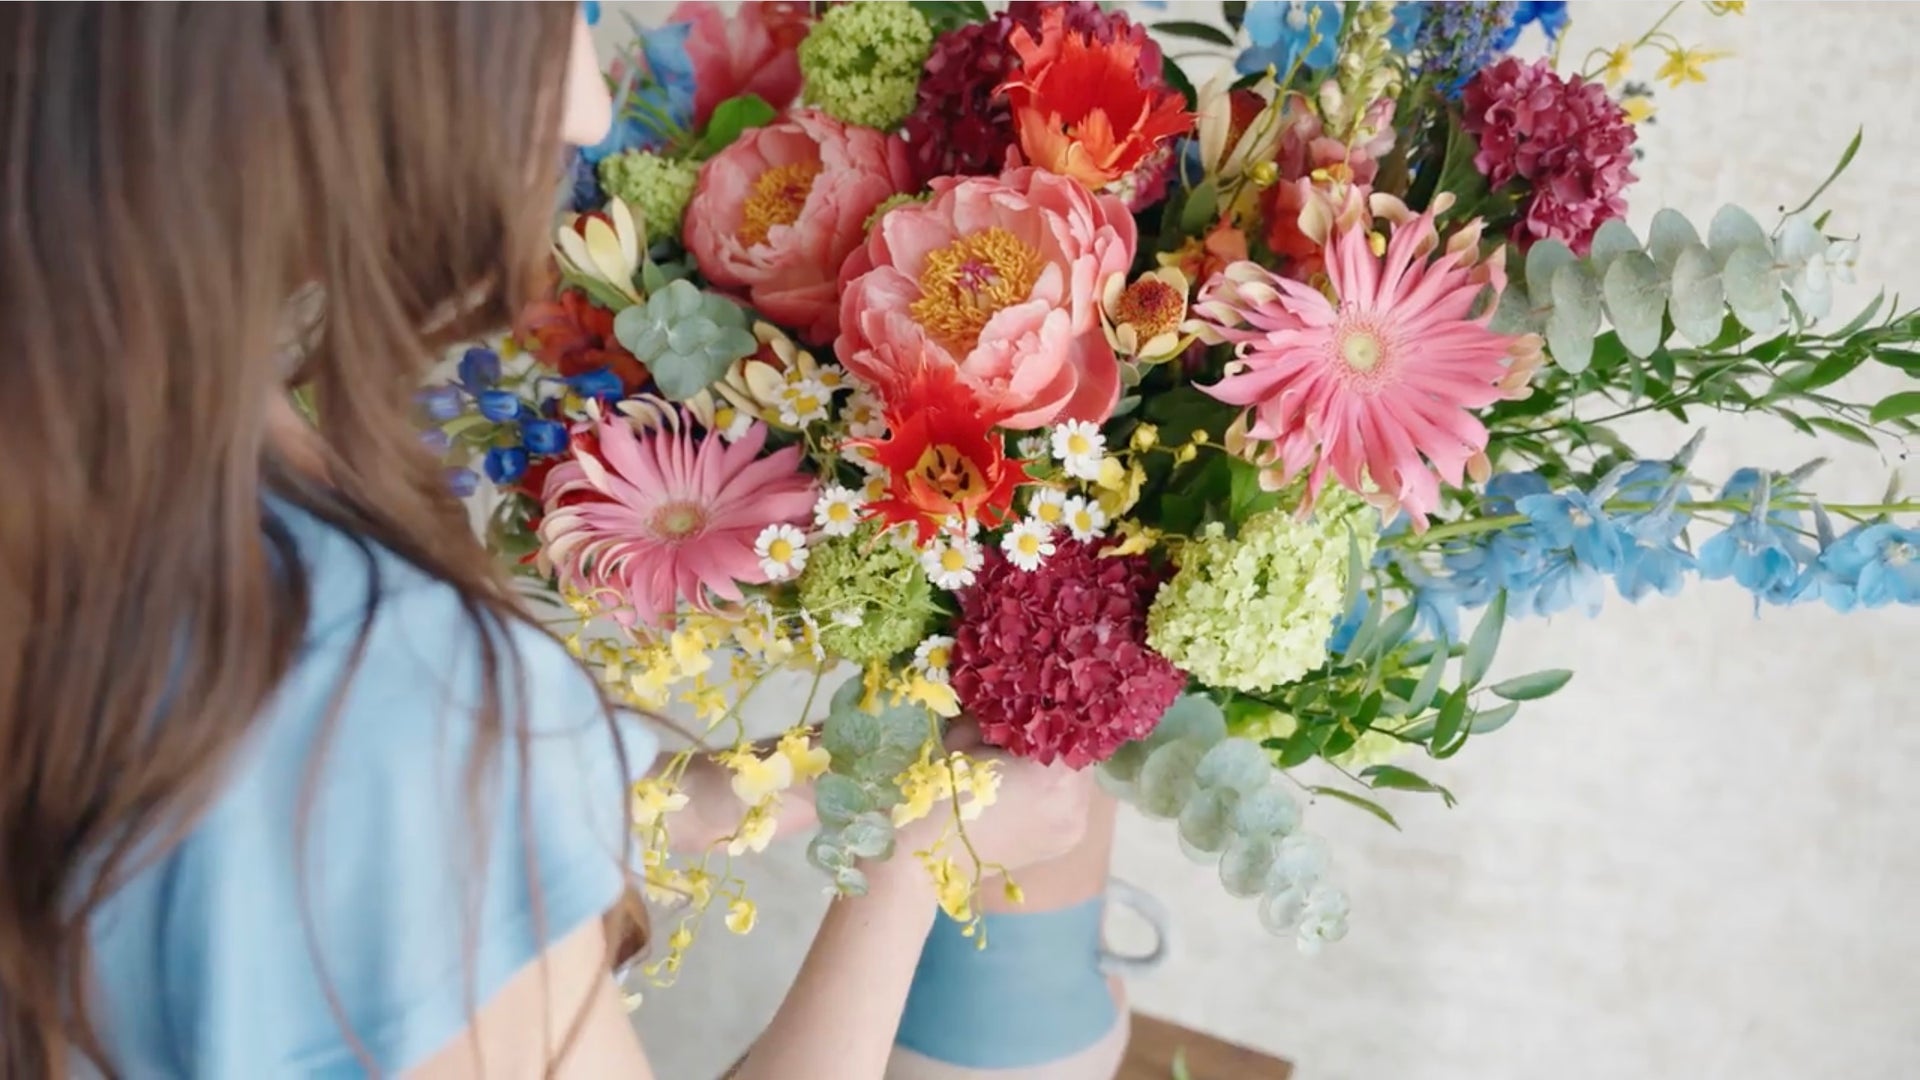 Load video: A day in the studio at The Bloom Of Time. Showcasing floral subscription arrangements of varying size.